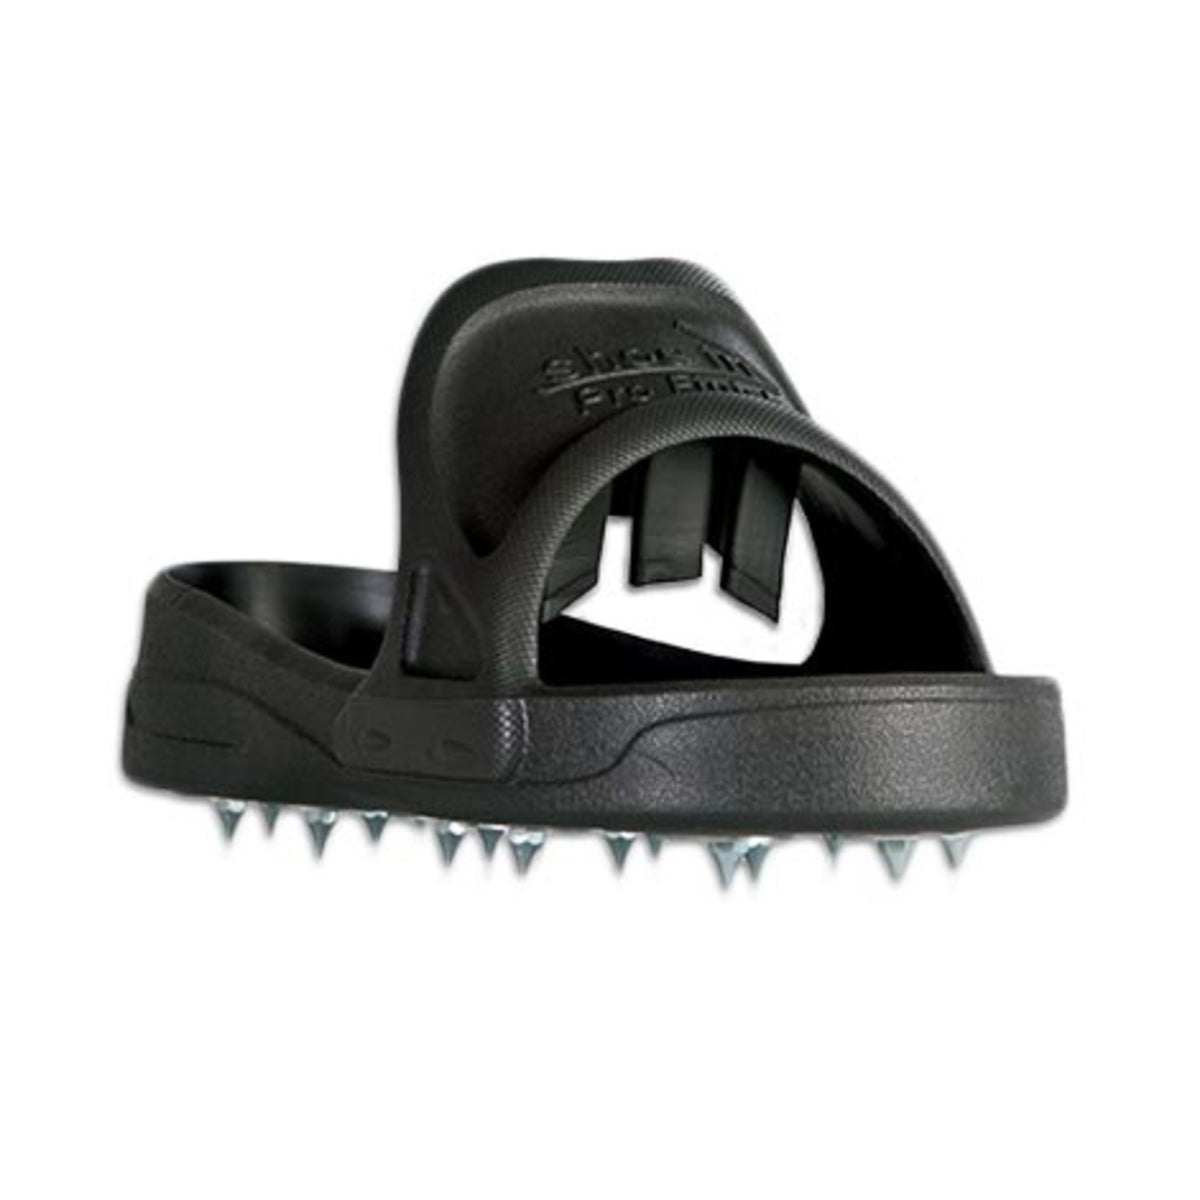 Spiked Shoes for Epoxy Floor Coating Installation - 1 inch Spikes with  Adjustable Straps